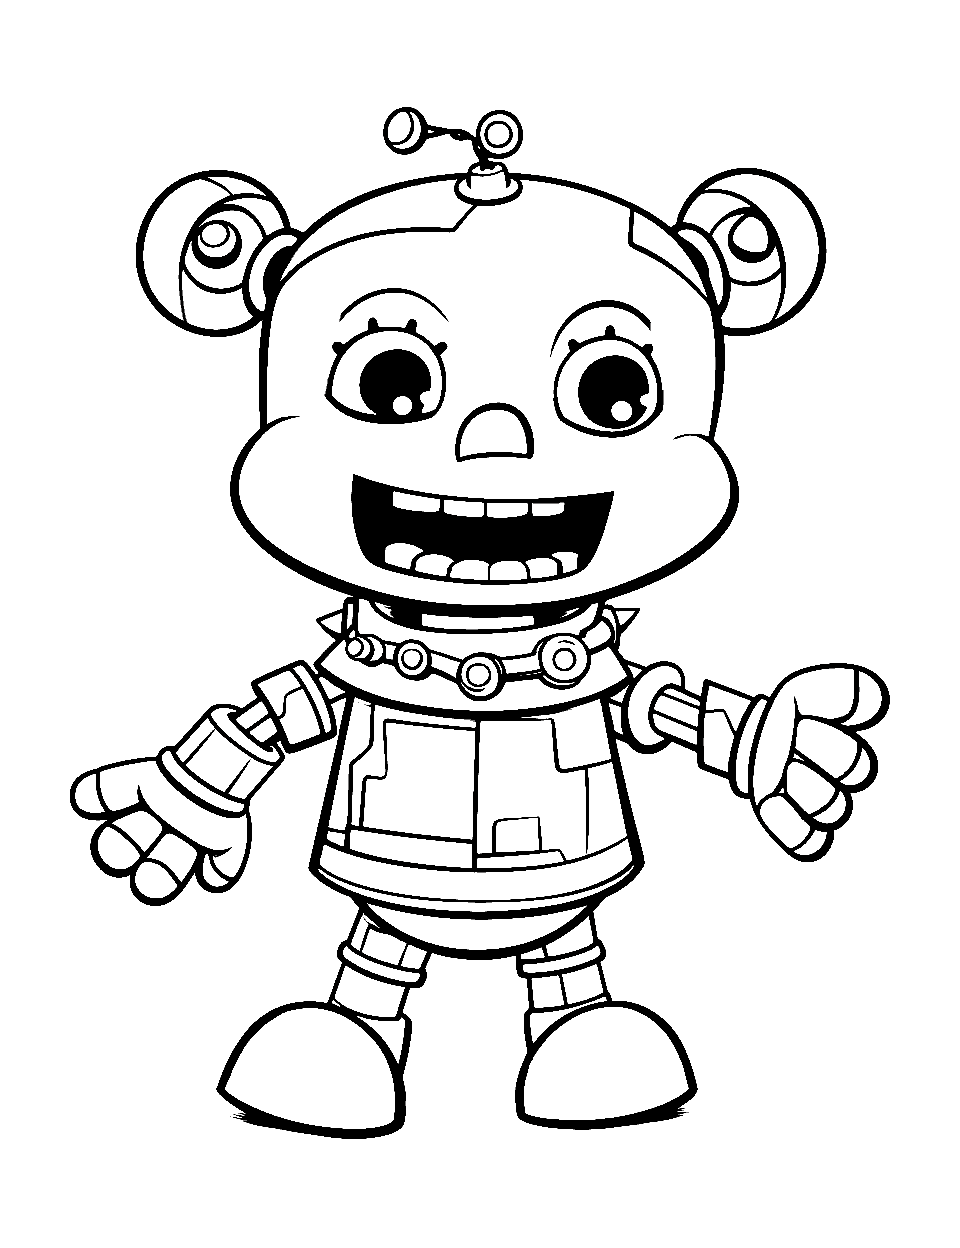 Toy Animatronic Play Coloring Page - A toy animatronic enjoying playtime.